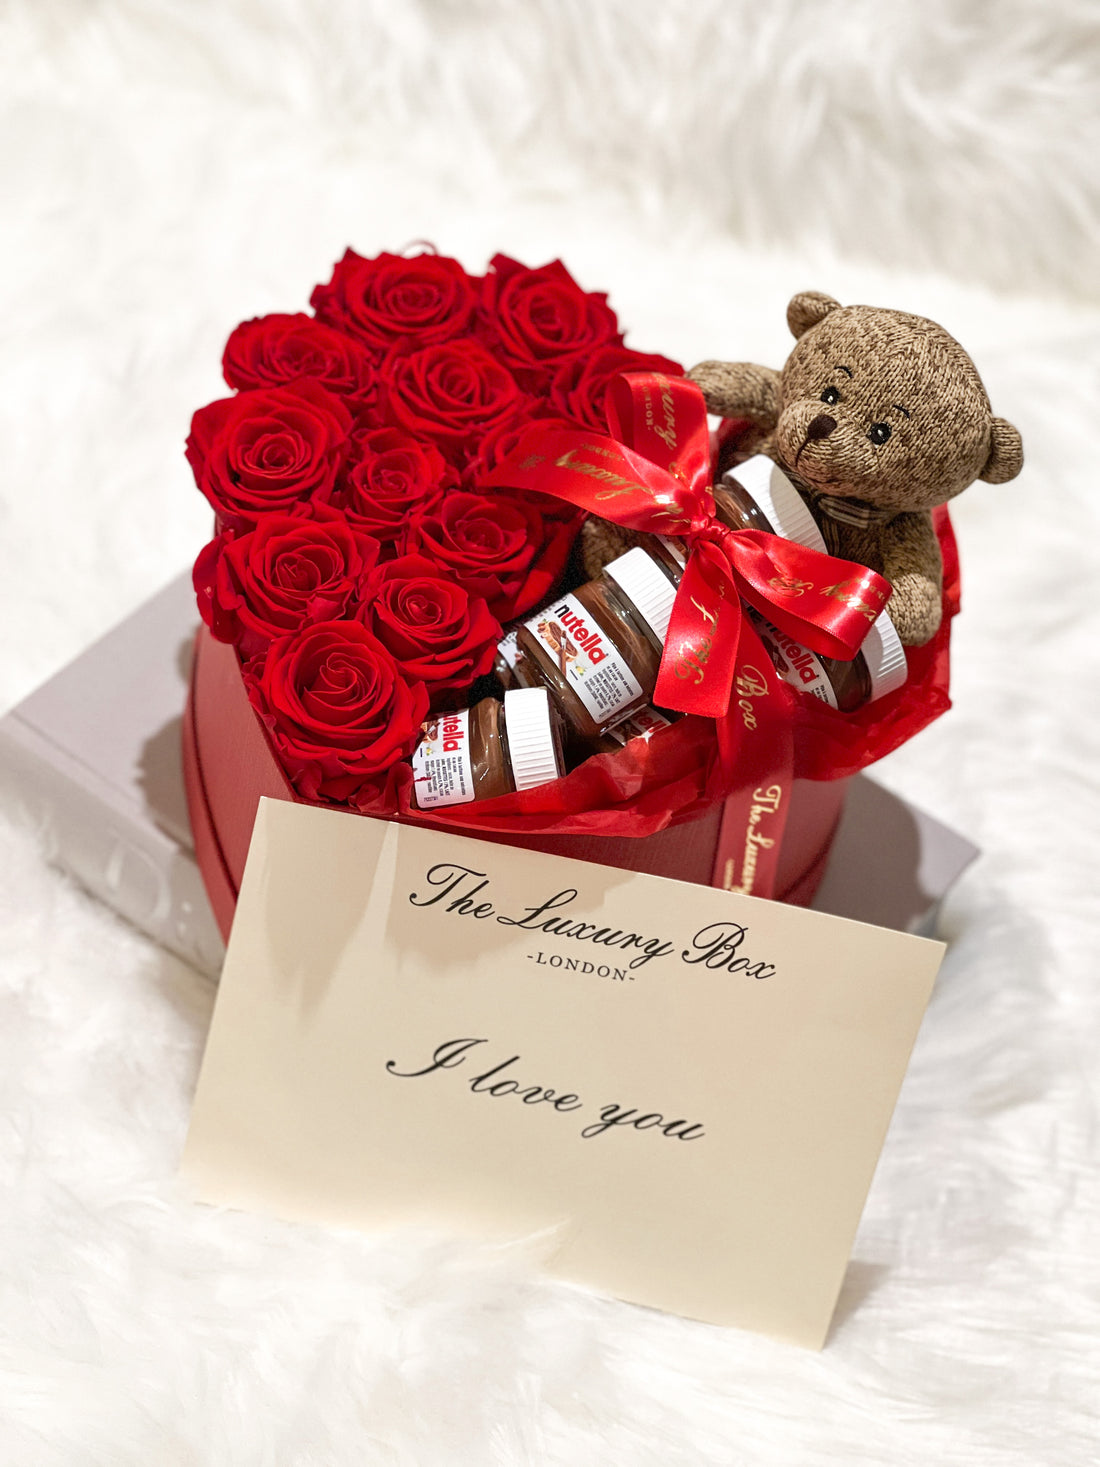 Preserved eternity roses and nutella gift set in heart shaped box with teddy bear and i love you card